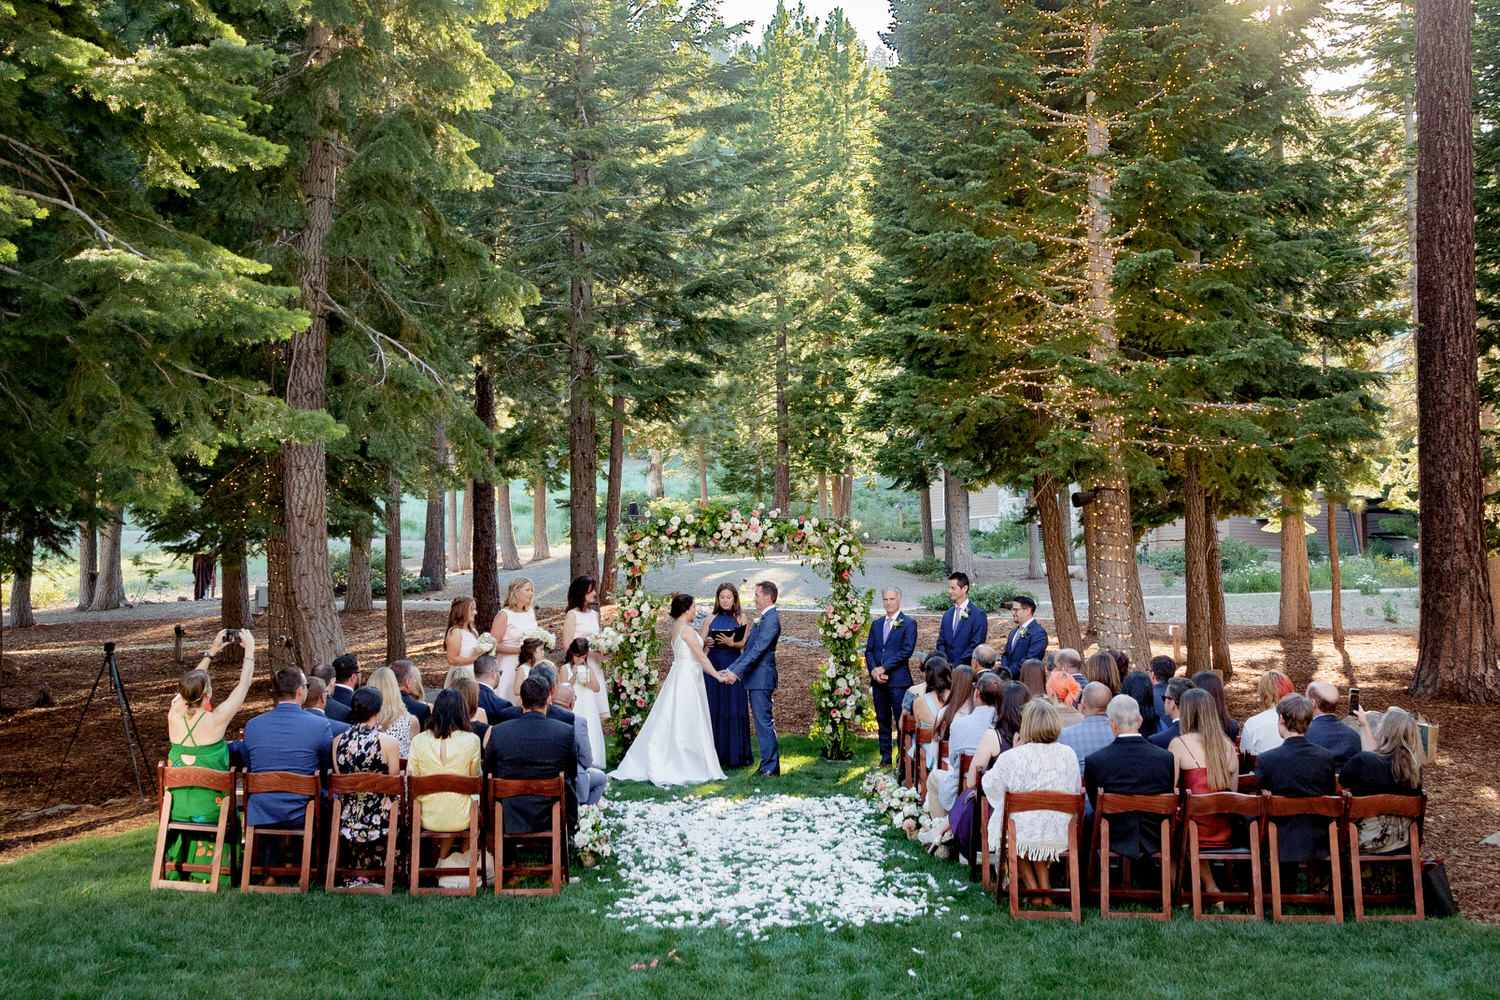 A wide angle view of a wedding ceremony at The Woods venue.